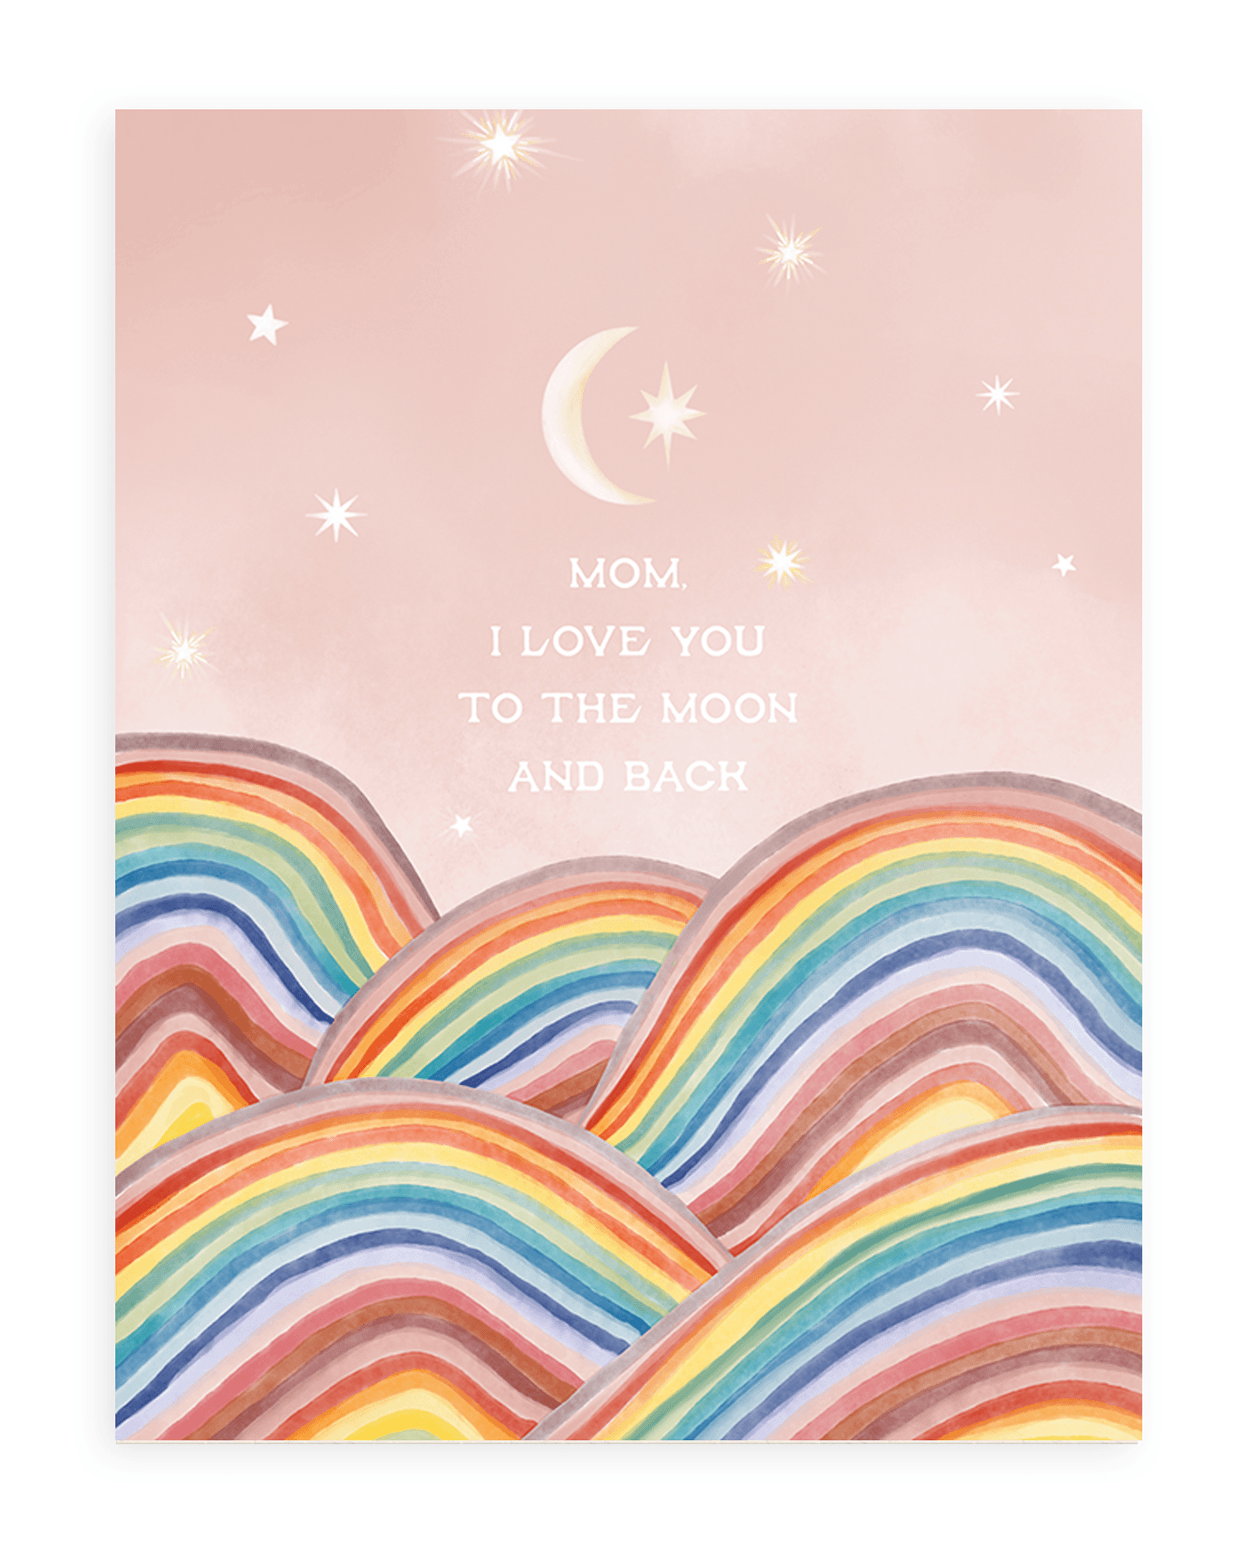 Adelfi card with the words &quot;Mom, I love you to the moon and back&quot; floating in a pink sky with a crescent moon and stars above rainbow hills against a white background.